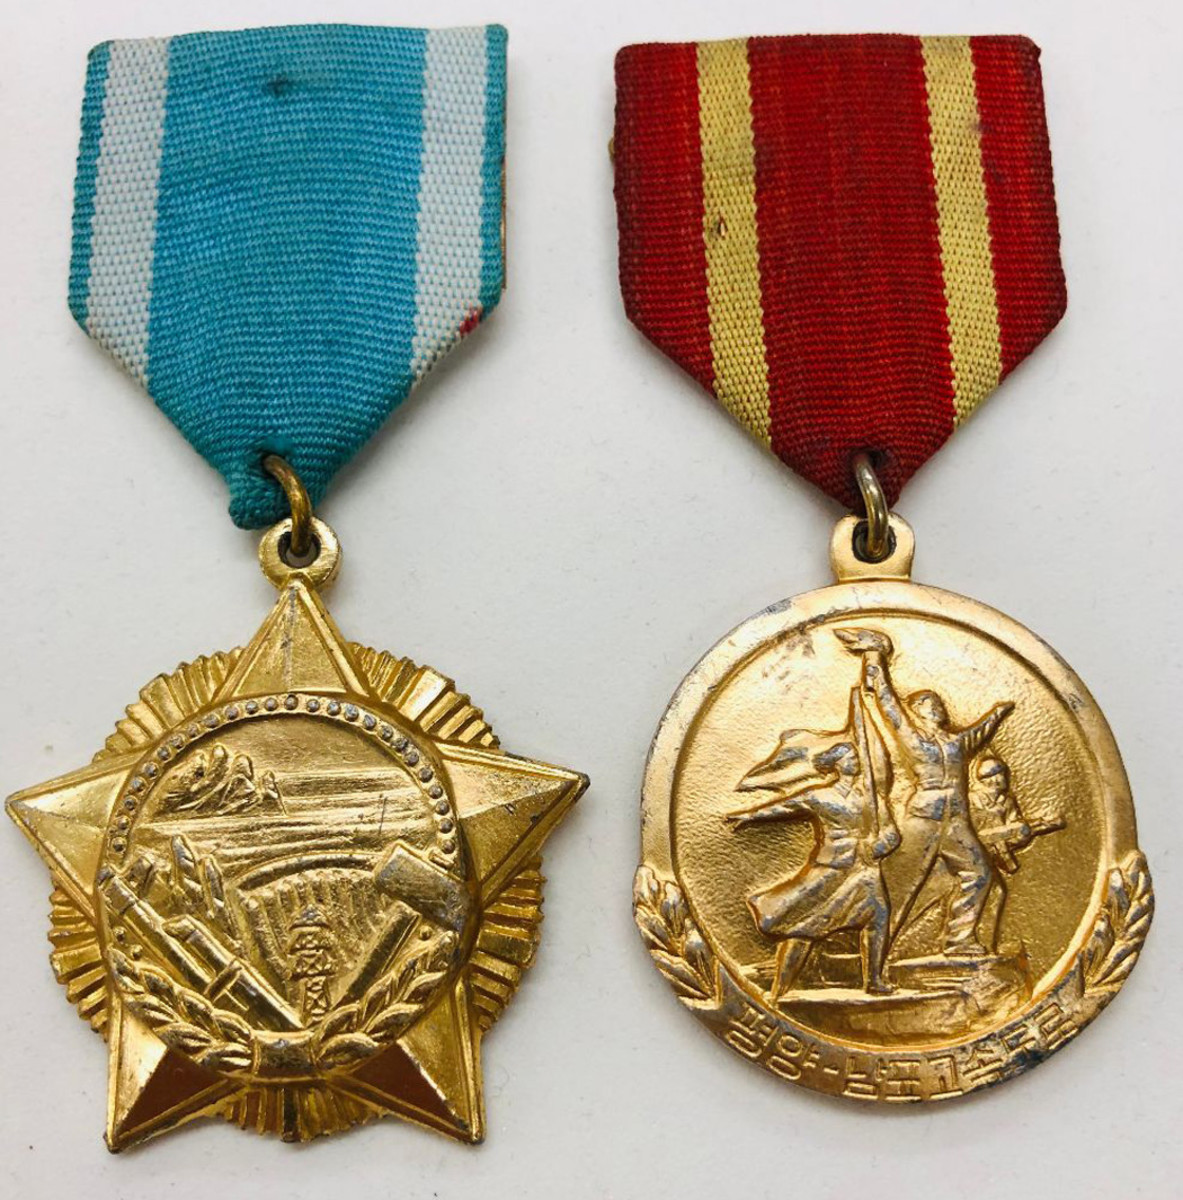 Both the Mt. Kumgang Power Plant Construction Medal and the Pyongyang-Nampo Highway Construction Medal illustrate how medals are used to reward workers in a socialist society.